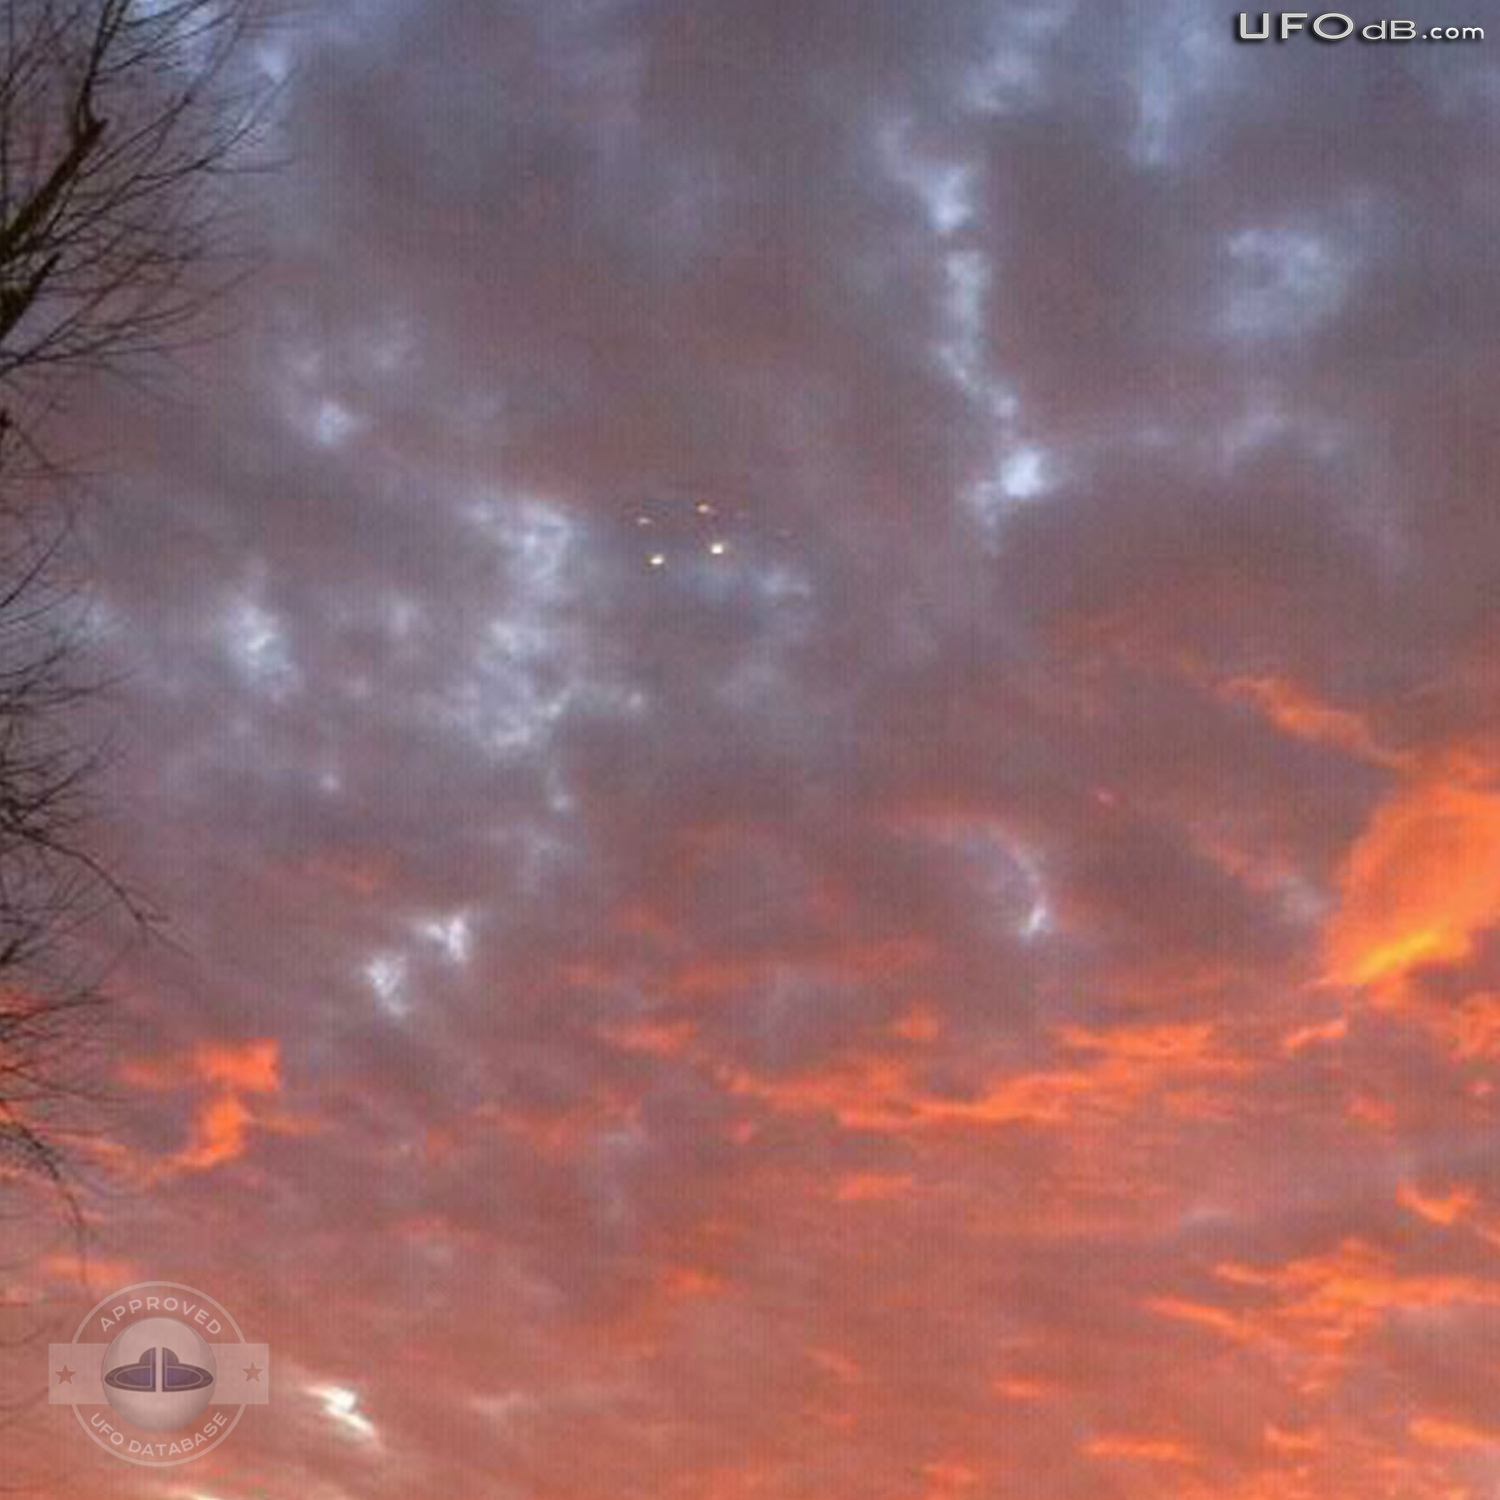 A picture from Madisonville show a UFO hiding in the clouds | USA 2011 UFO Picture #277-2